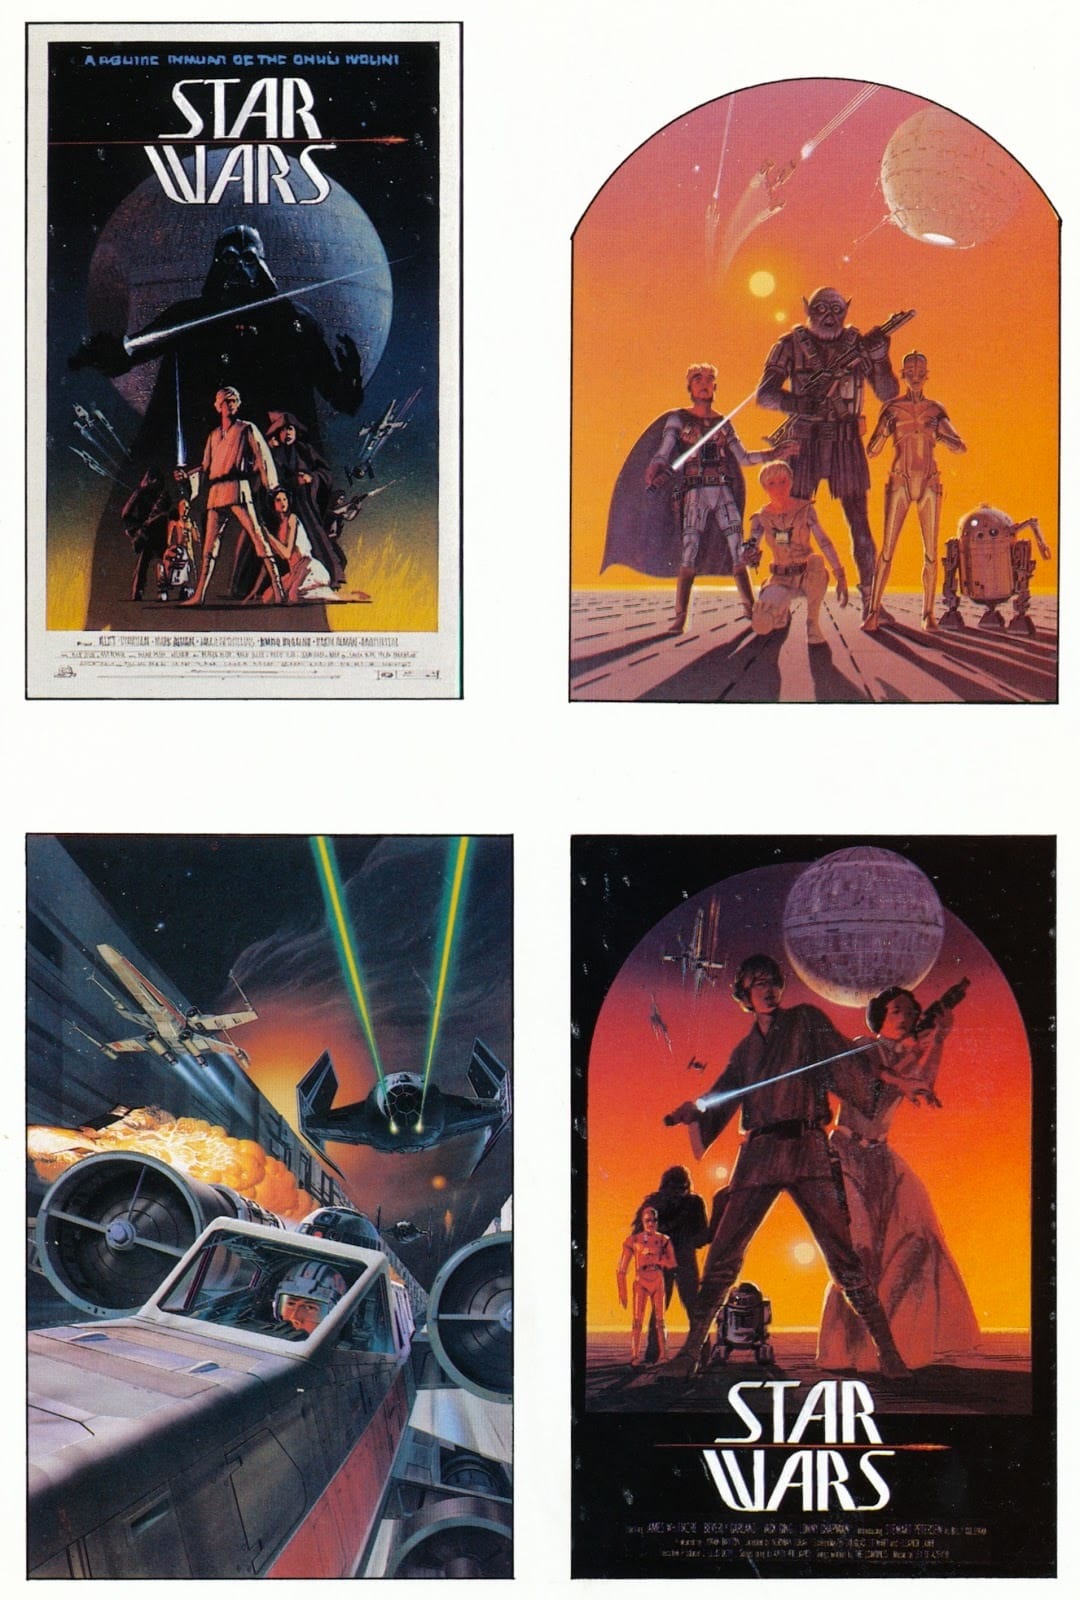 Pre-release Star Wars posters by Ralph McQuarrie